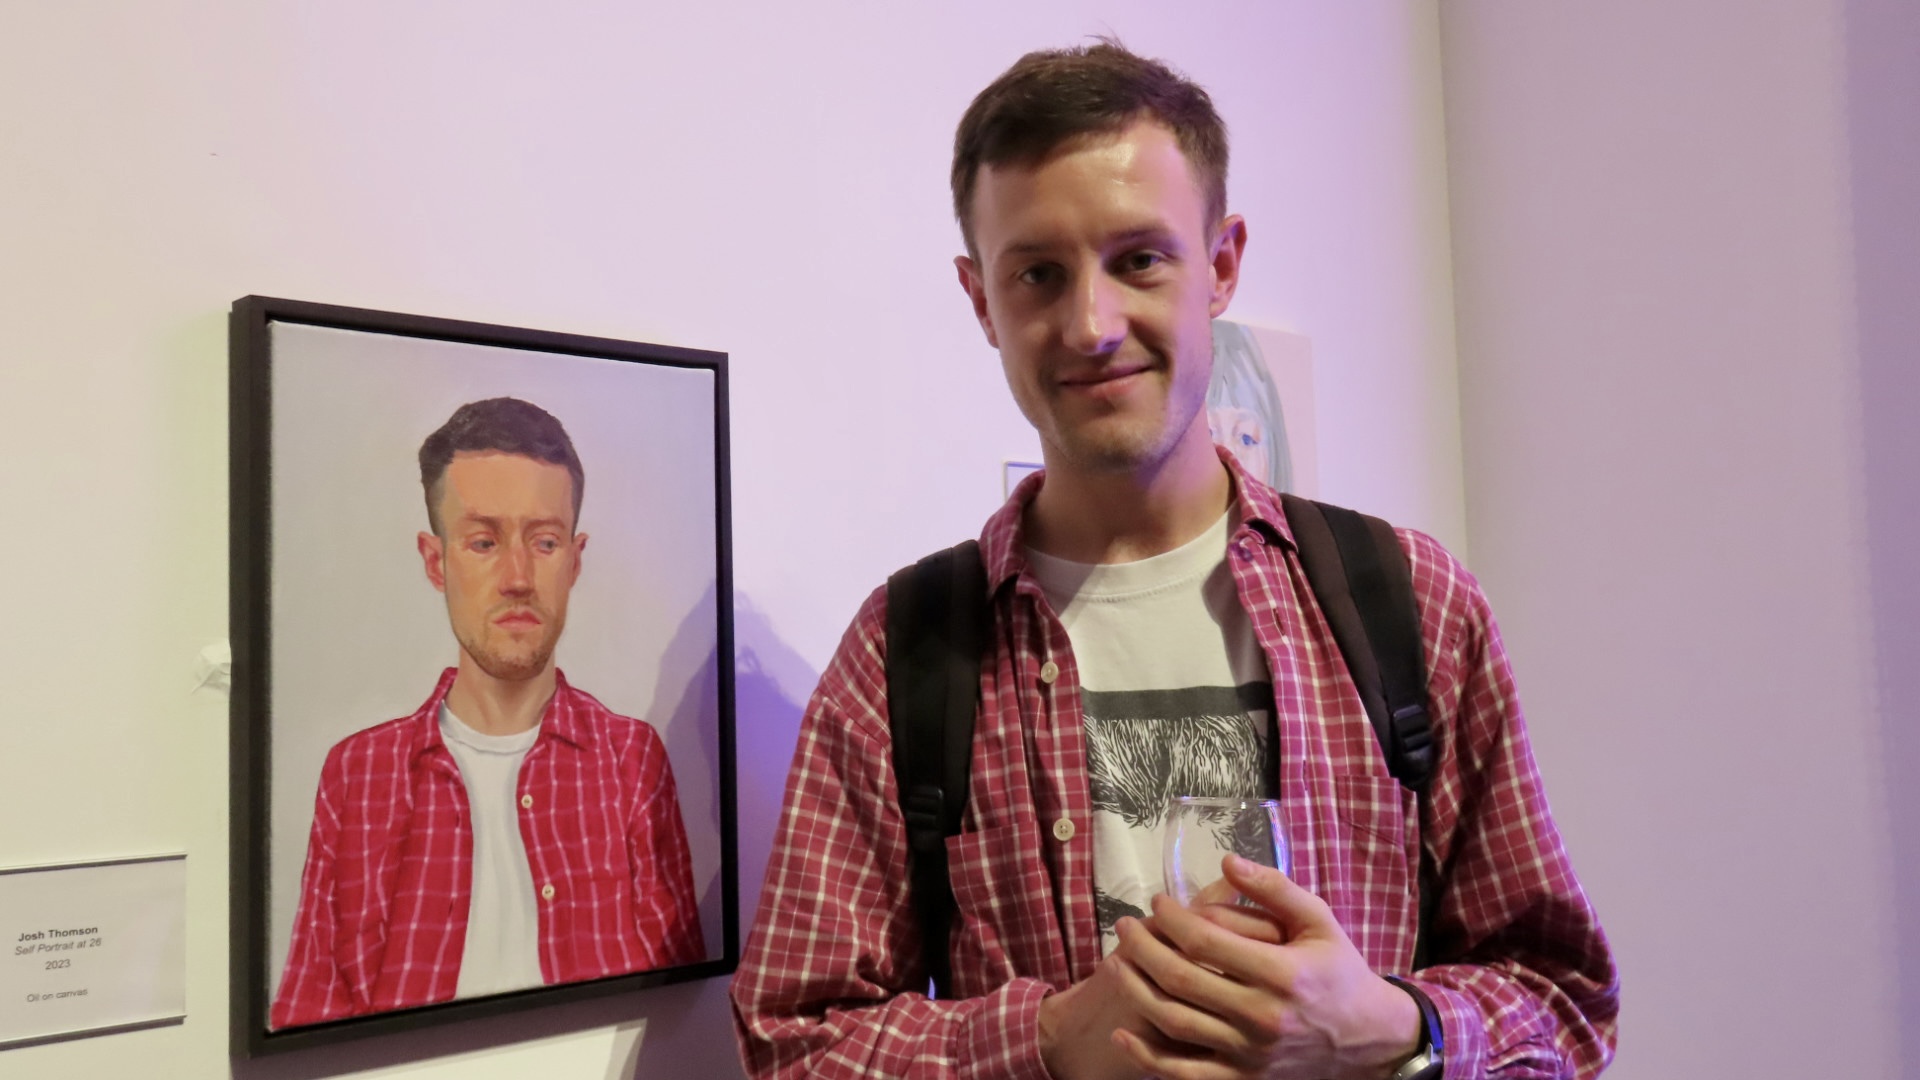 Works from the Self Portrait Prize 2023 are on display at the Atkinson in Southport. Josh Thomson from Glasgow with his work 'Self Portrait at 26'. Photo by Andrew Brown Stand Up For Southport